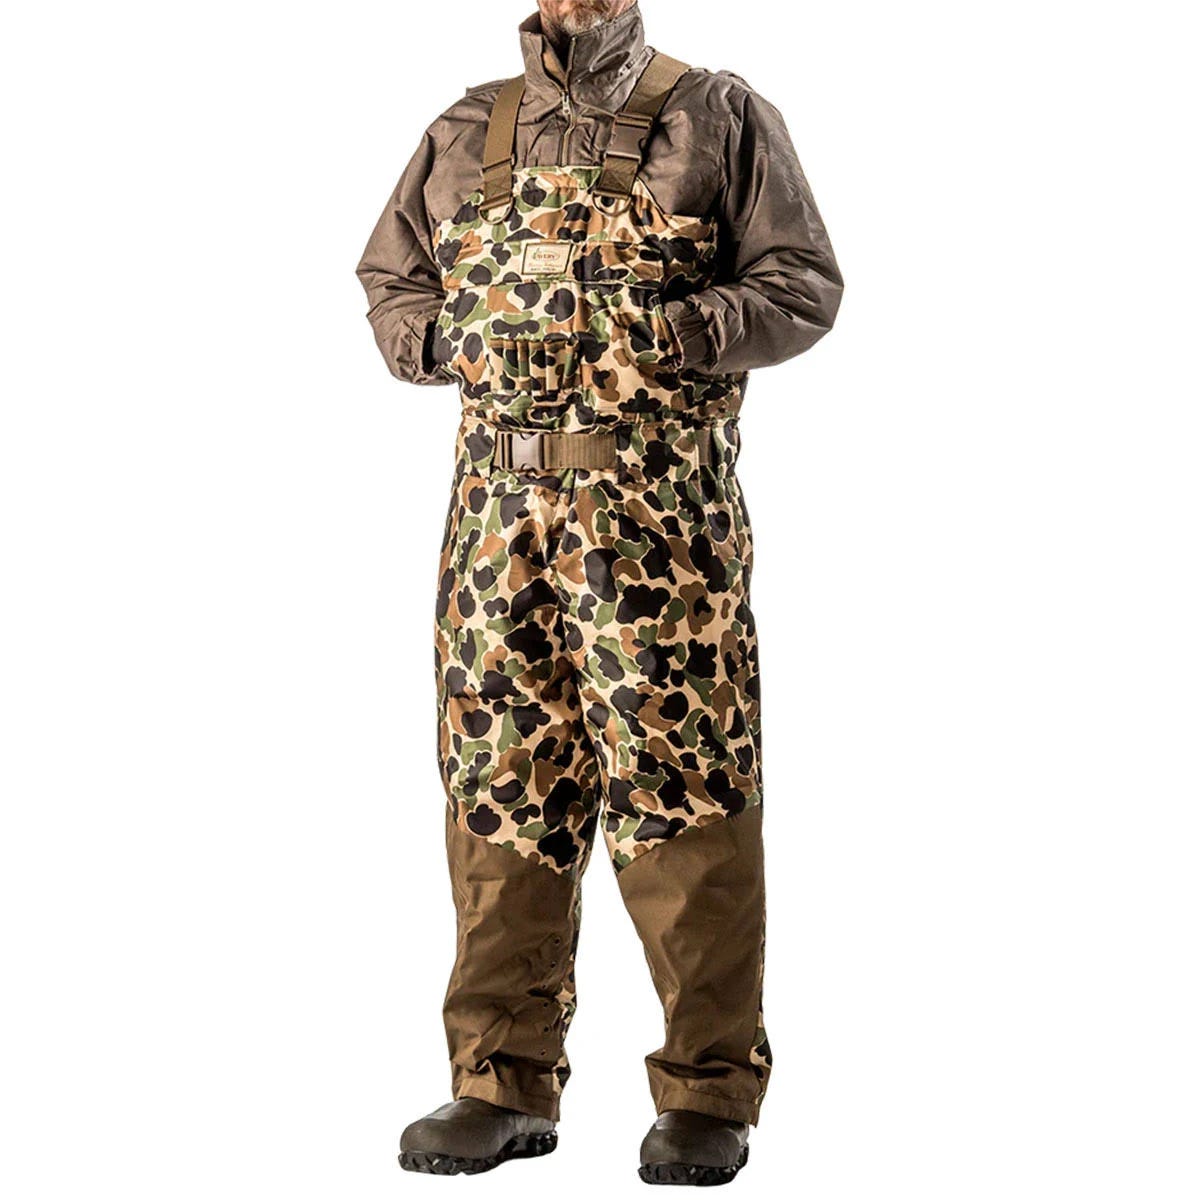 Best 3.0 Breathable Insulated Full Body Waders - Camo Design | Image